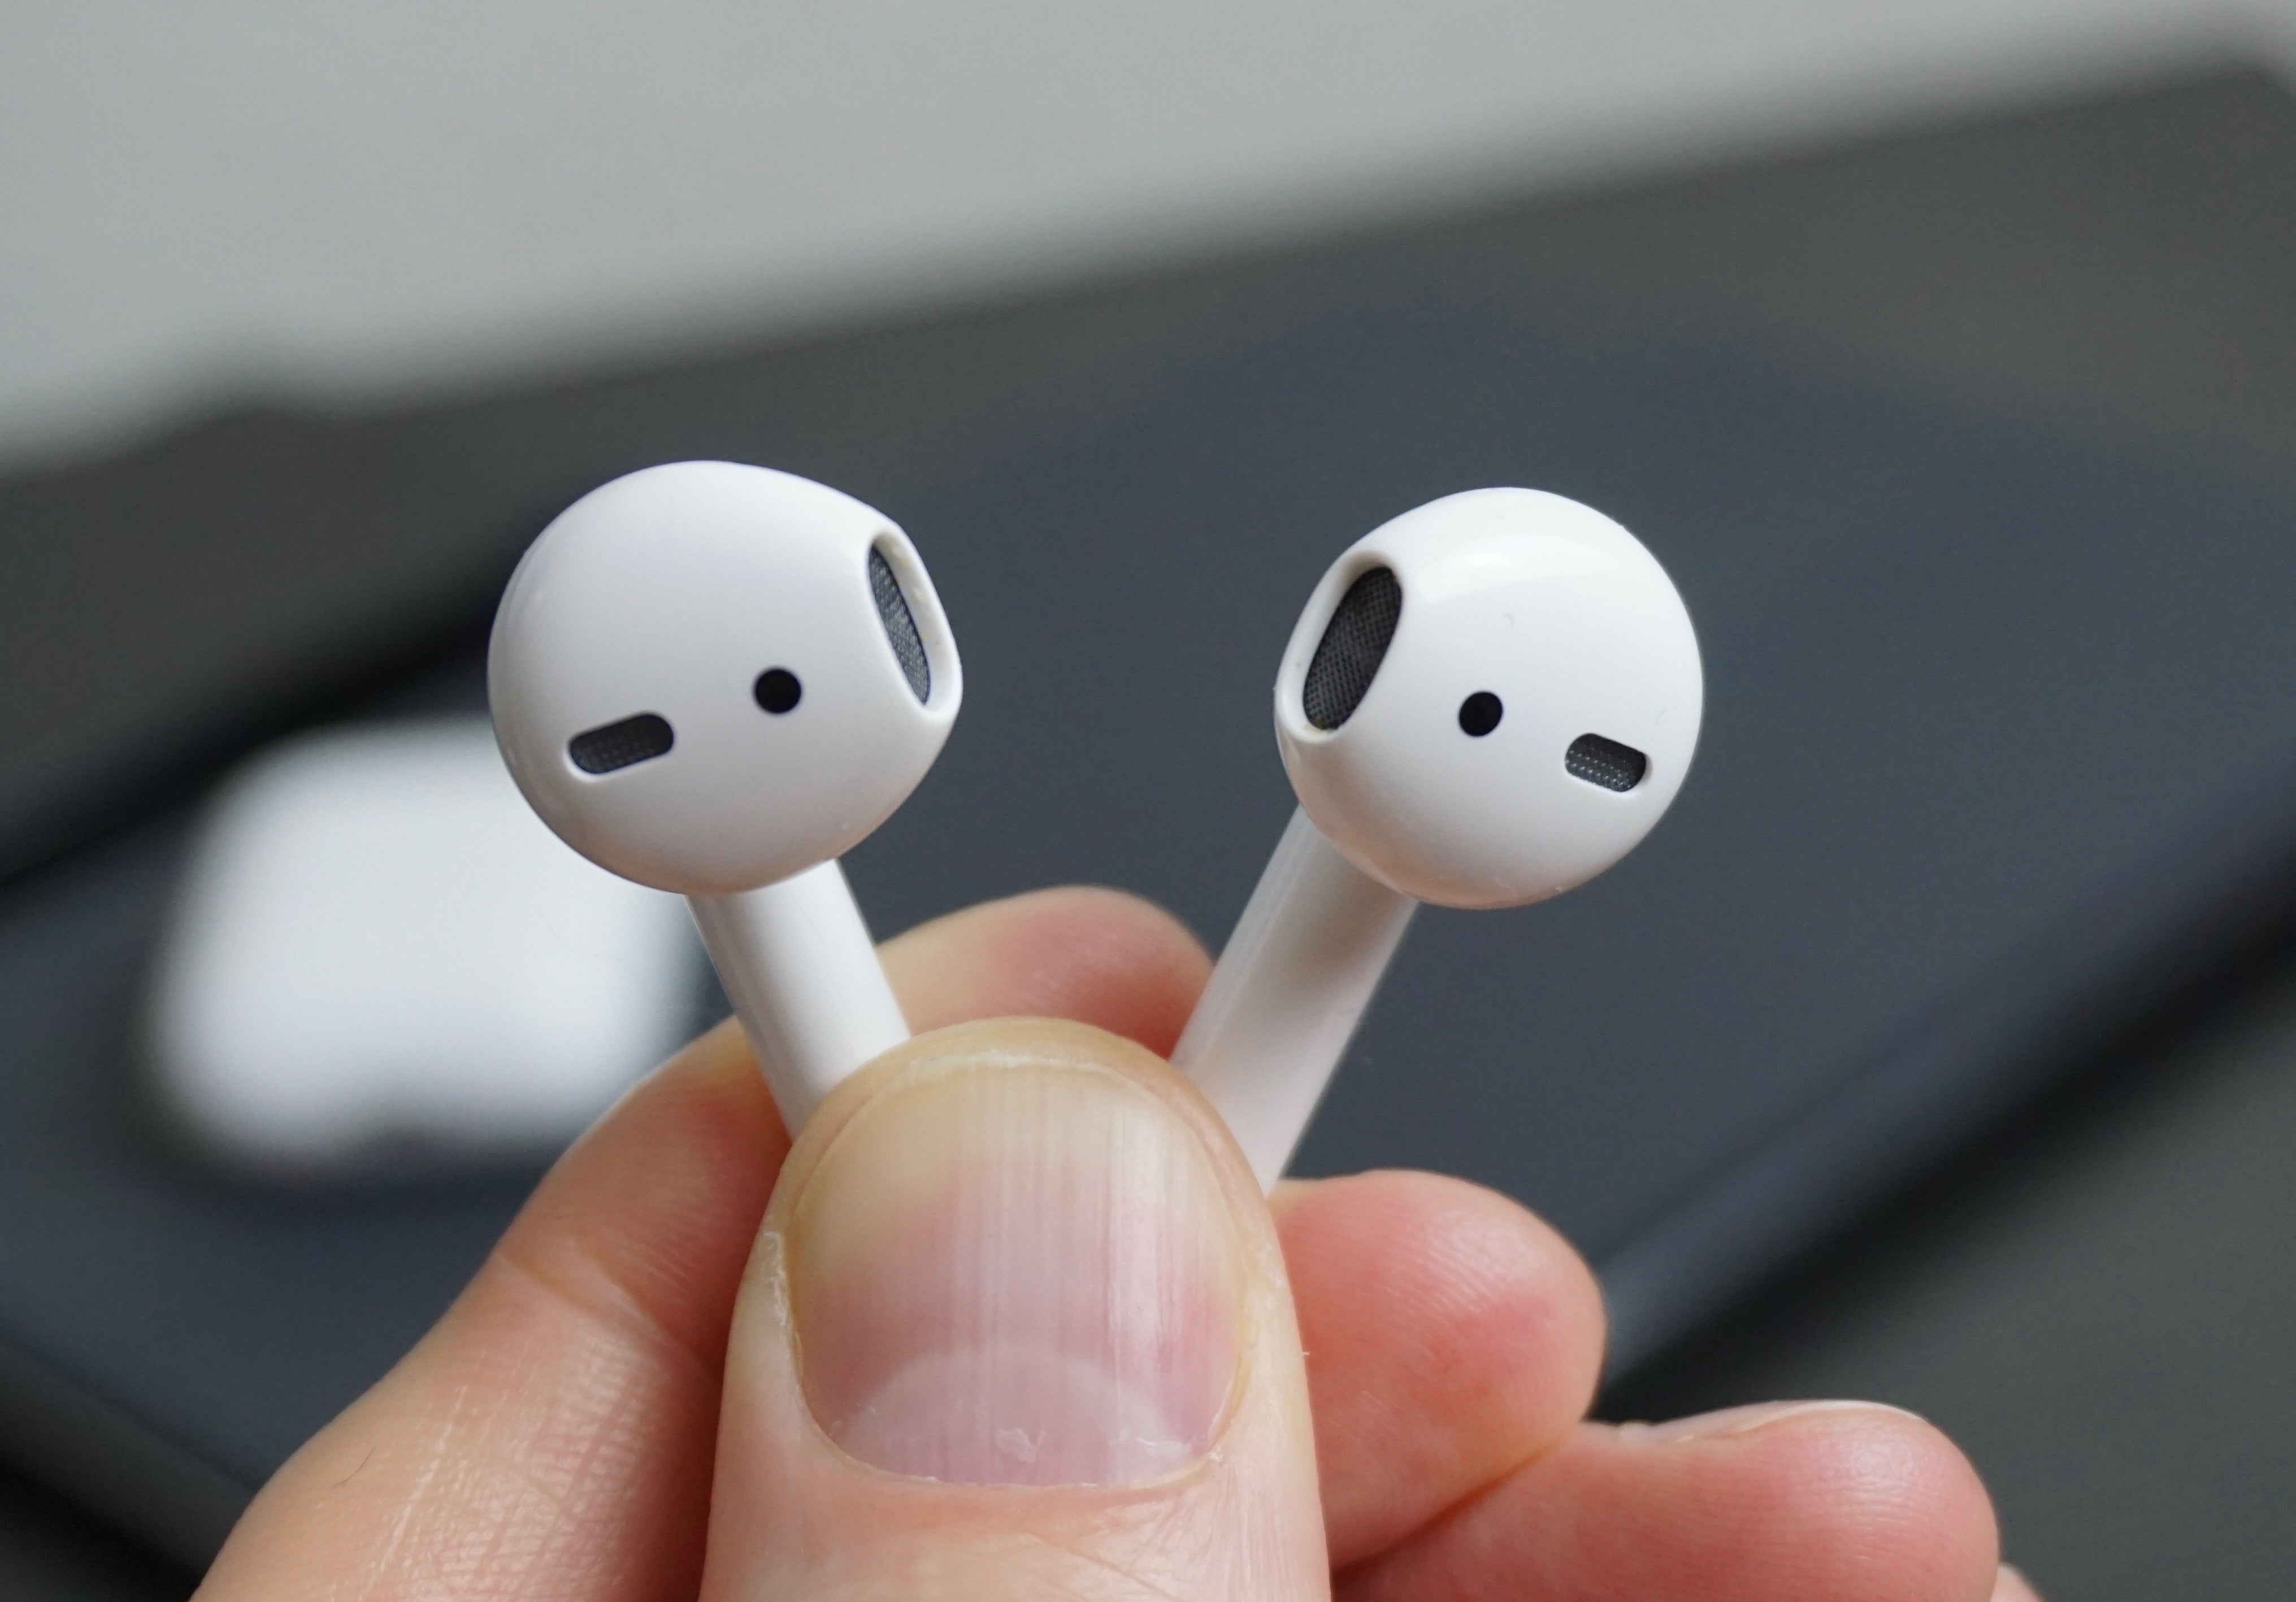 AirPods (2nd generation) review: Apple’s mega-hit headphones get a few